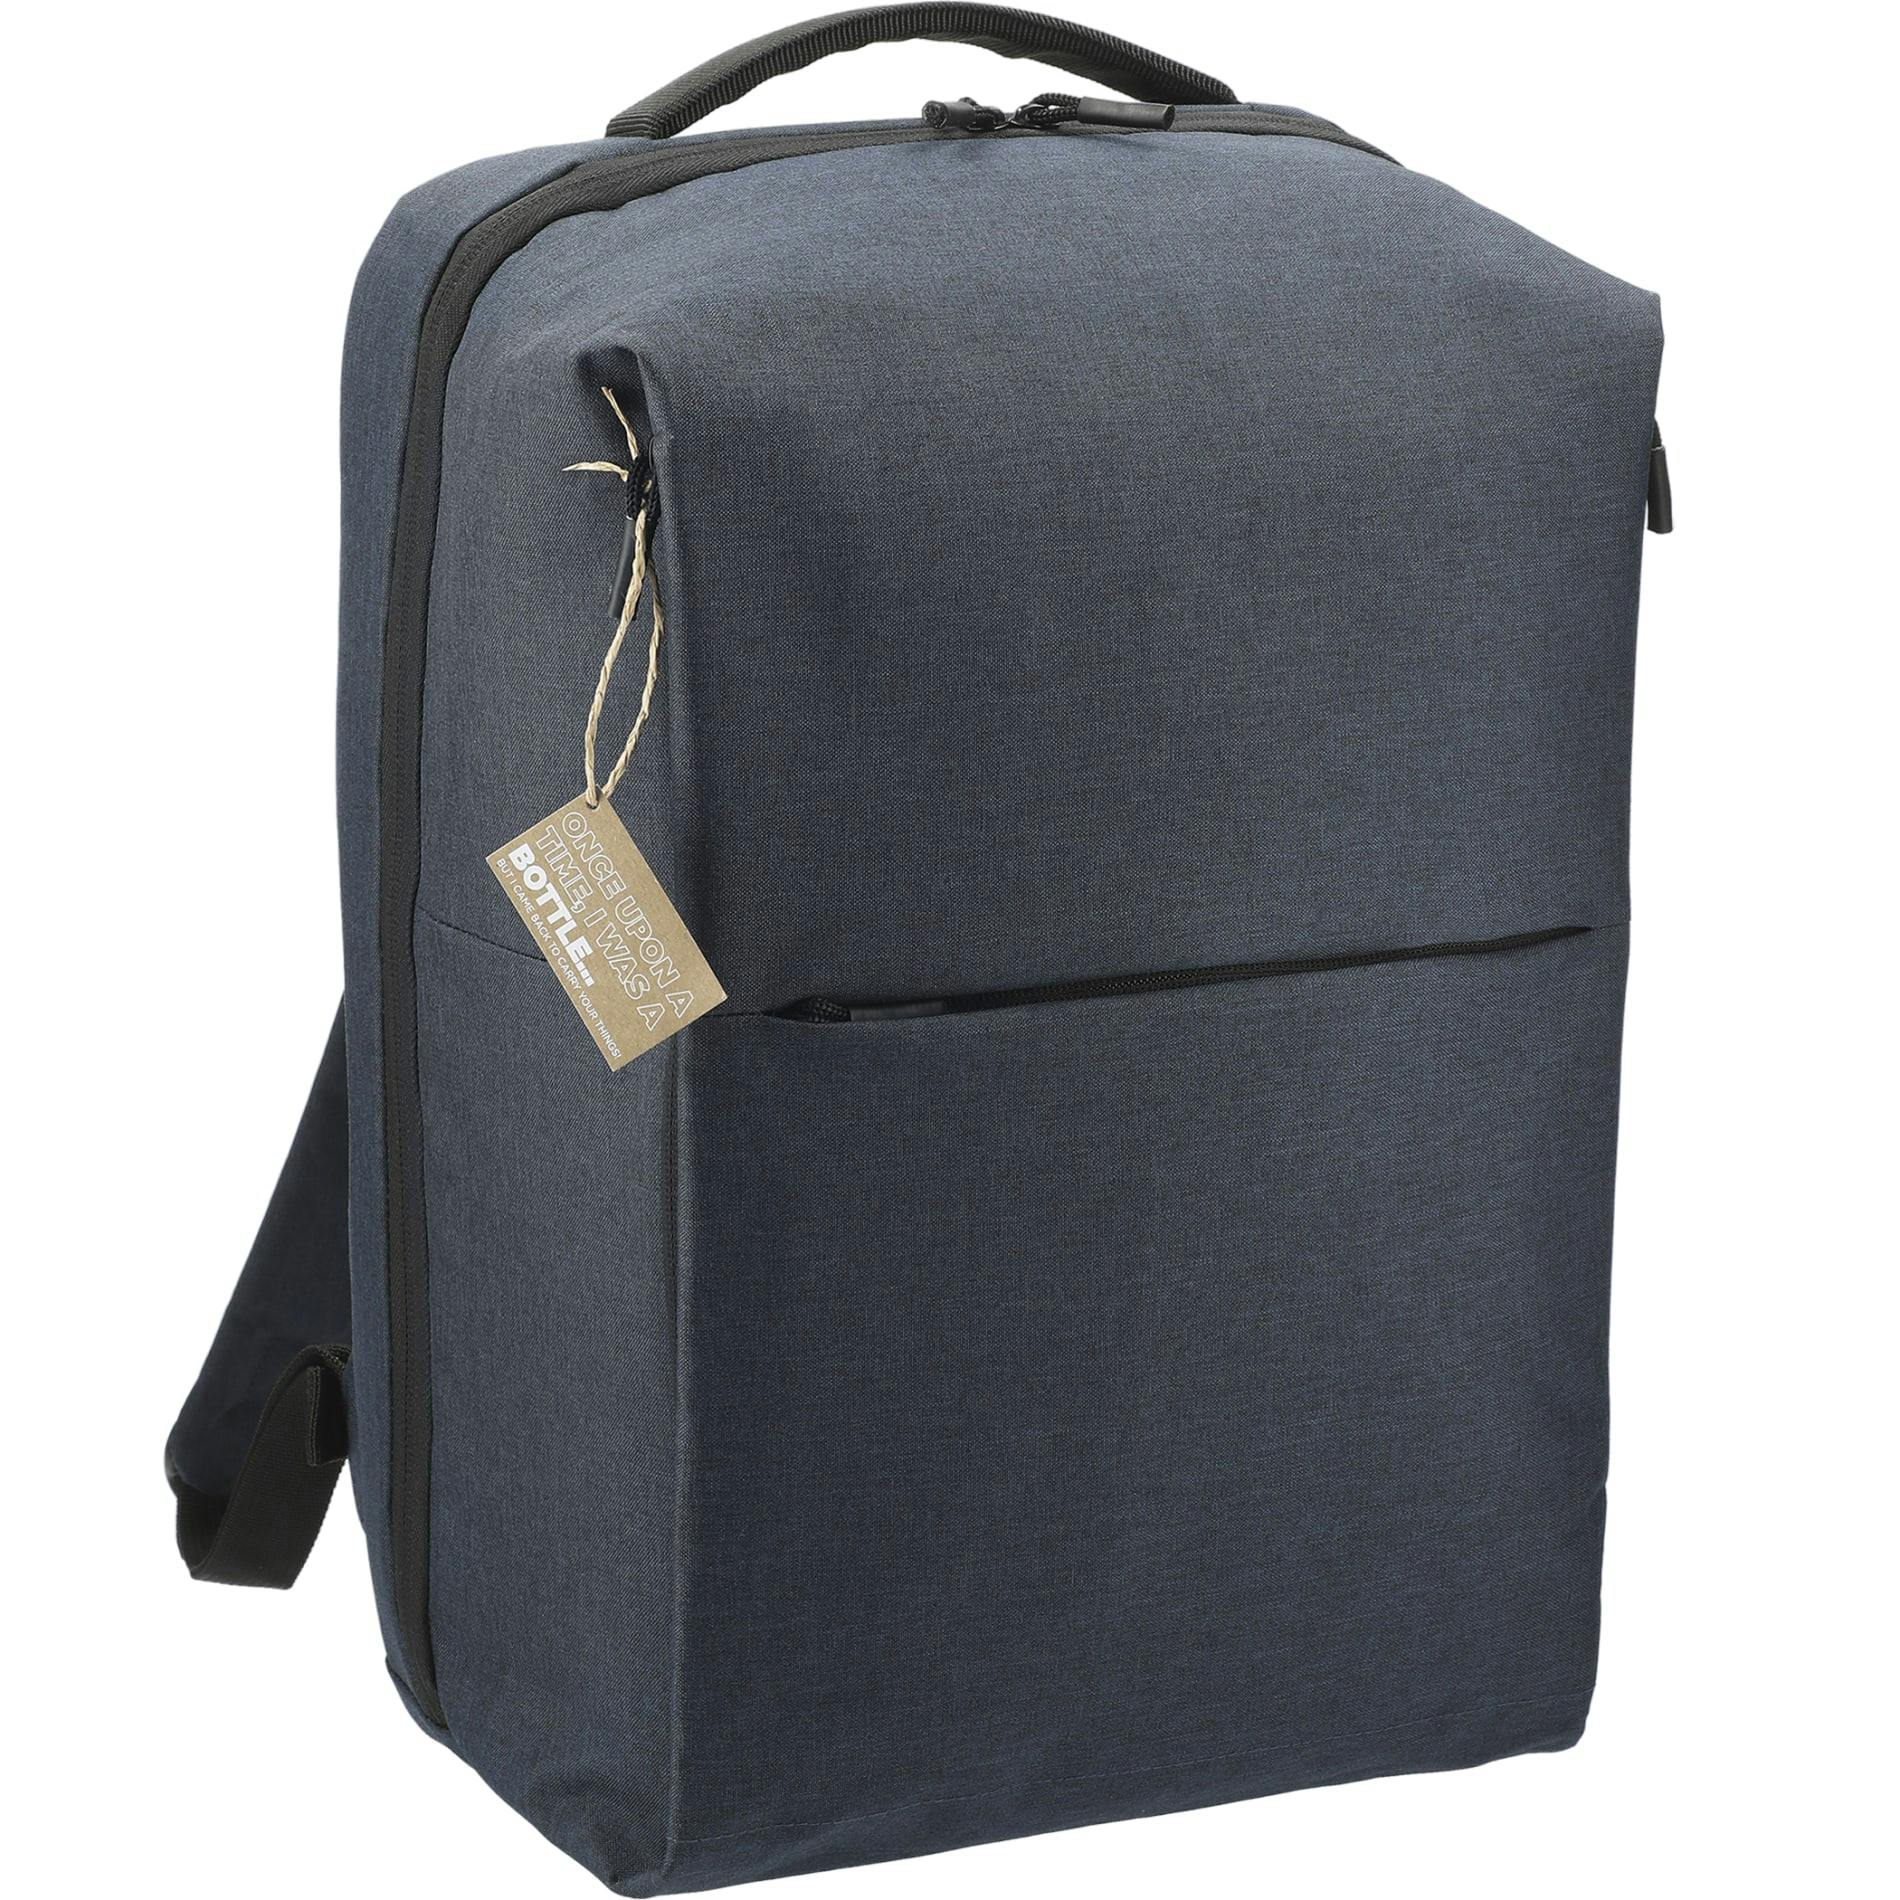 Aft Recycled 15" Computer Backpack - additional Image 2